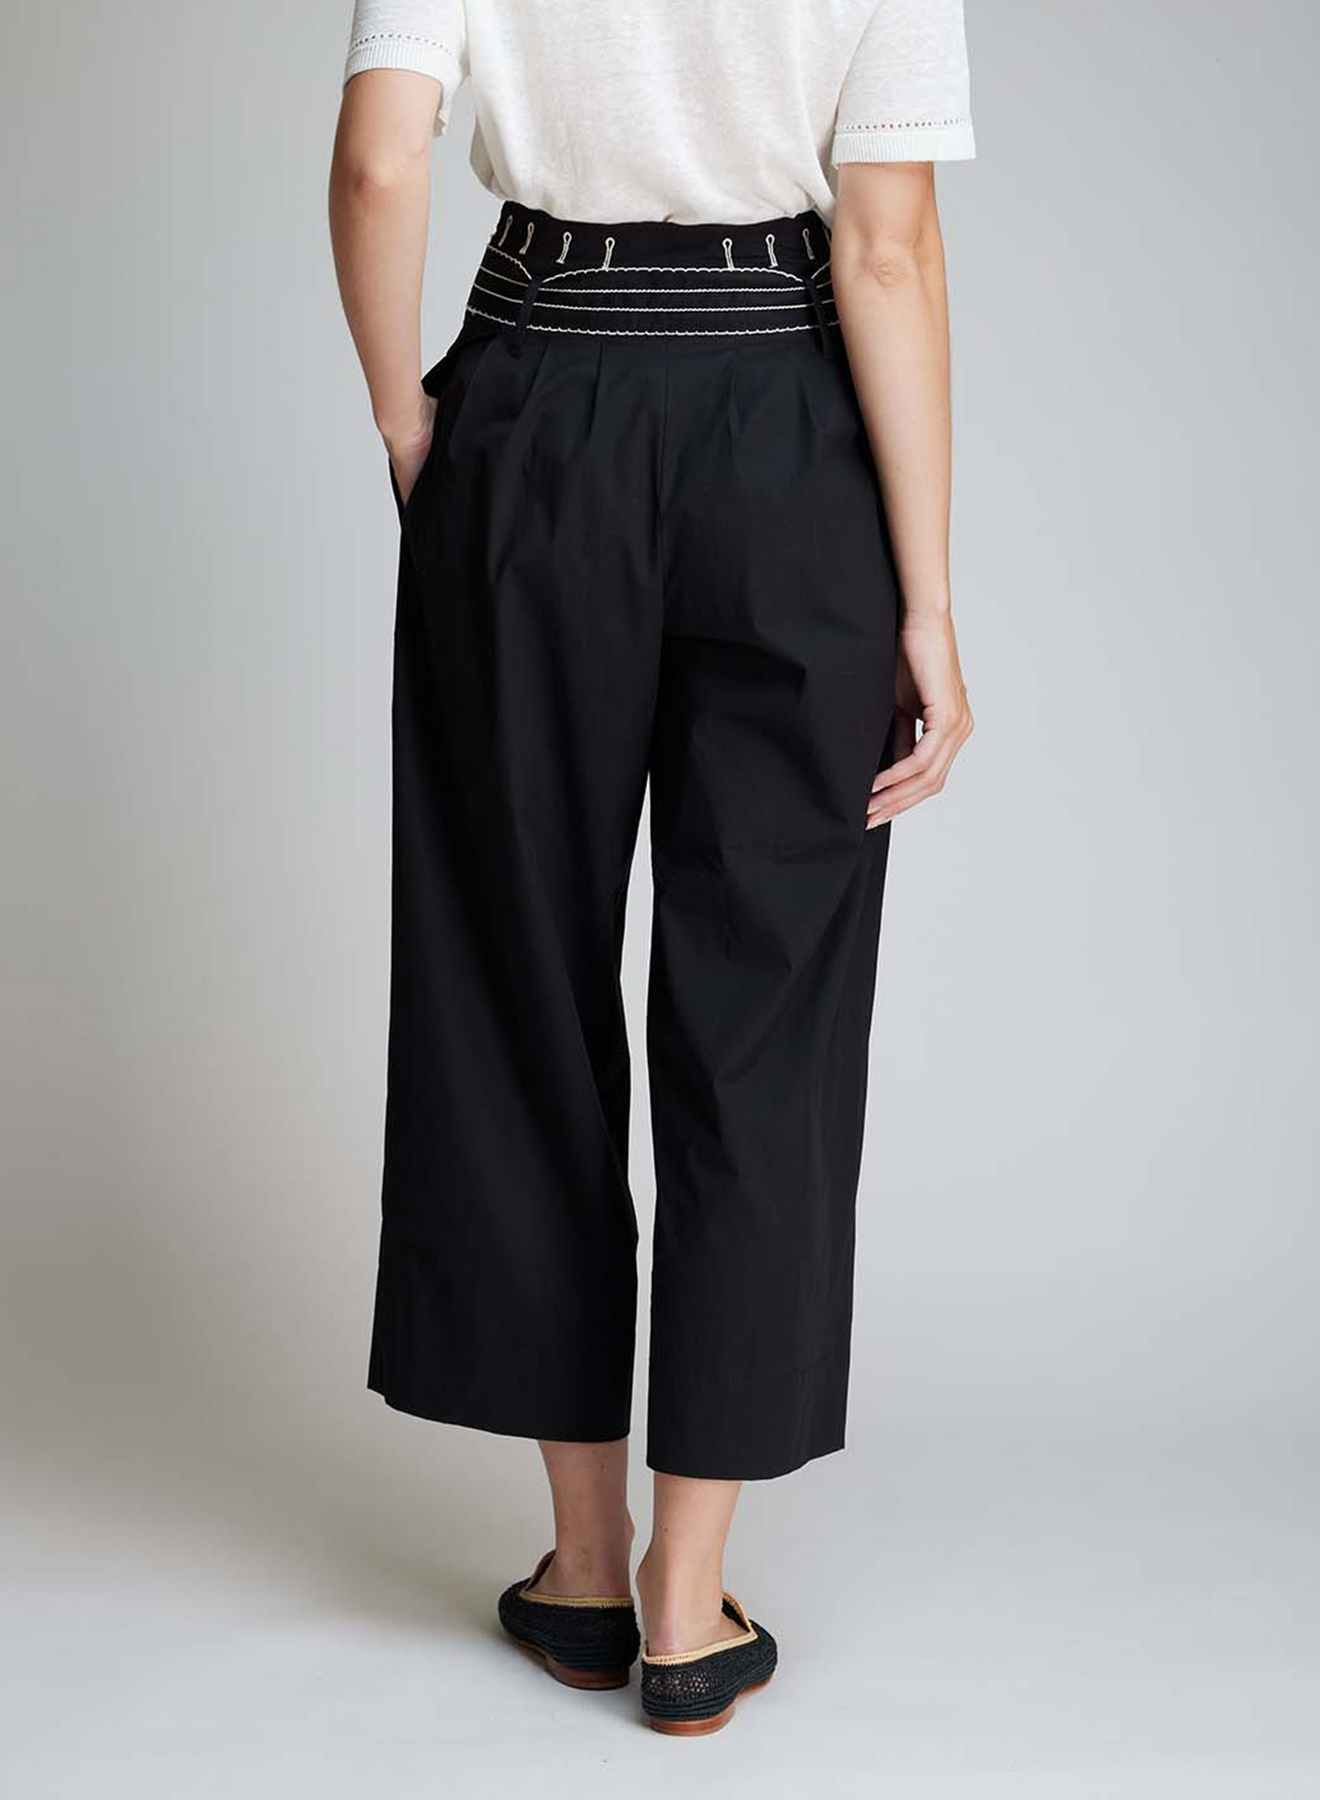 The Noemi Cropped Pant